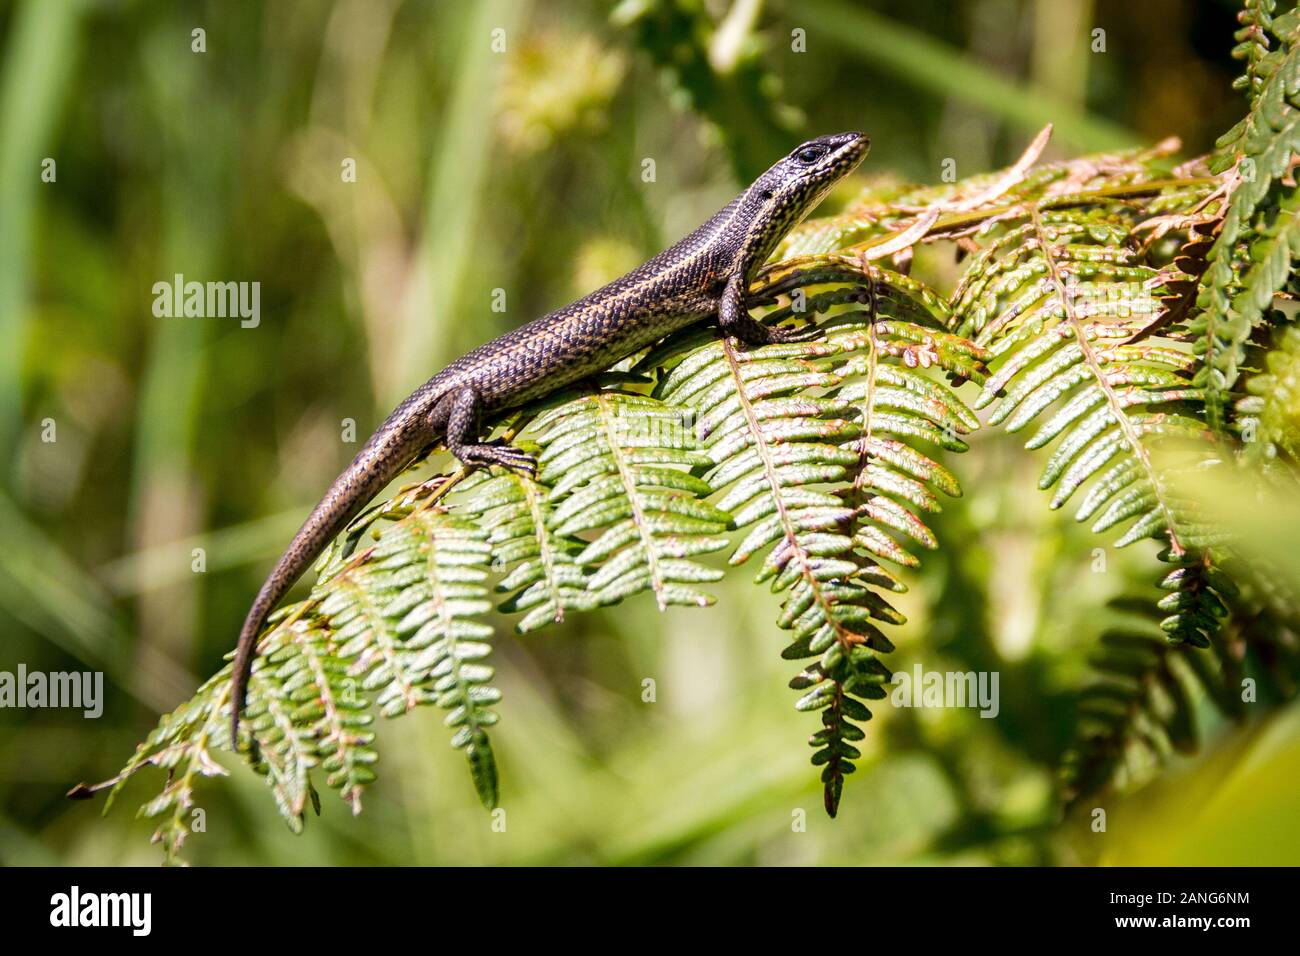 A yellow-brown lizard sitting on a fern leaf, Drakensberg, South Africa Stock Photo